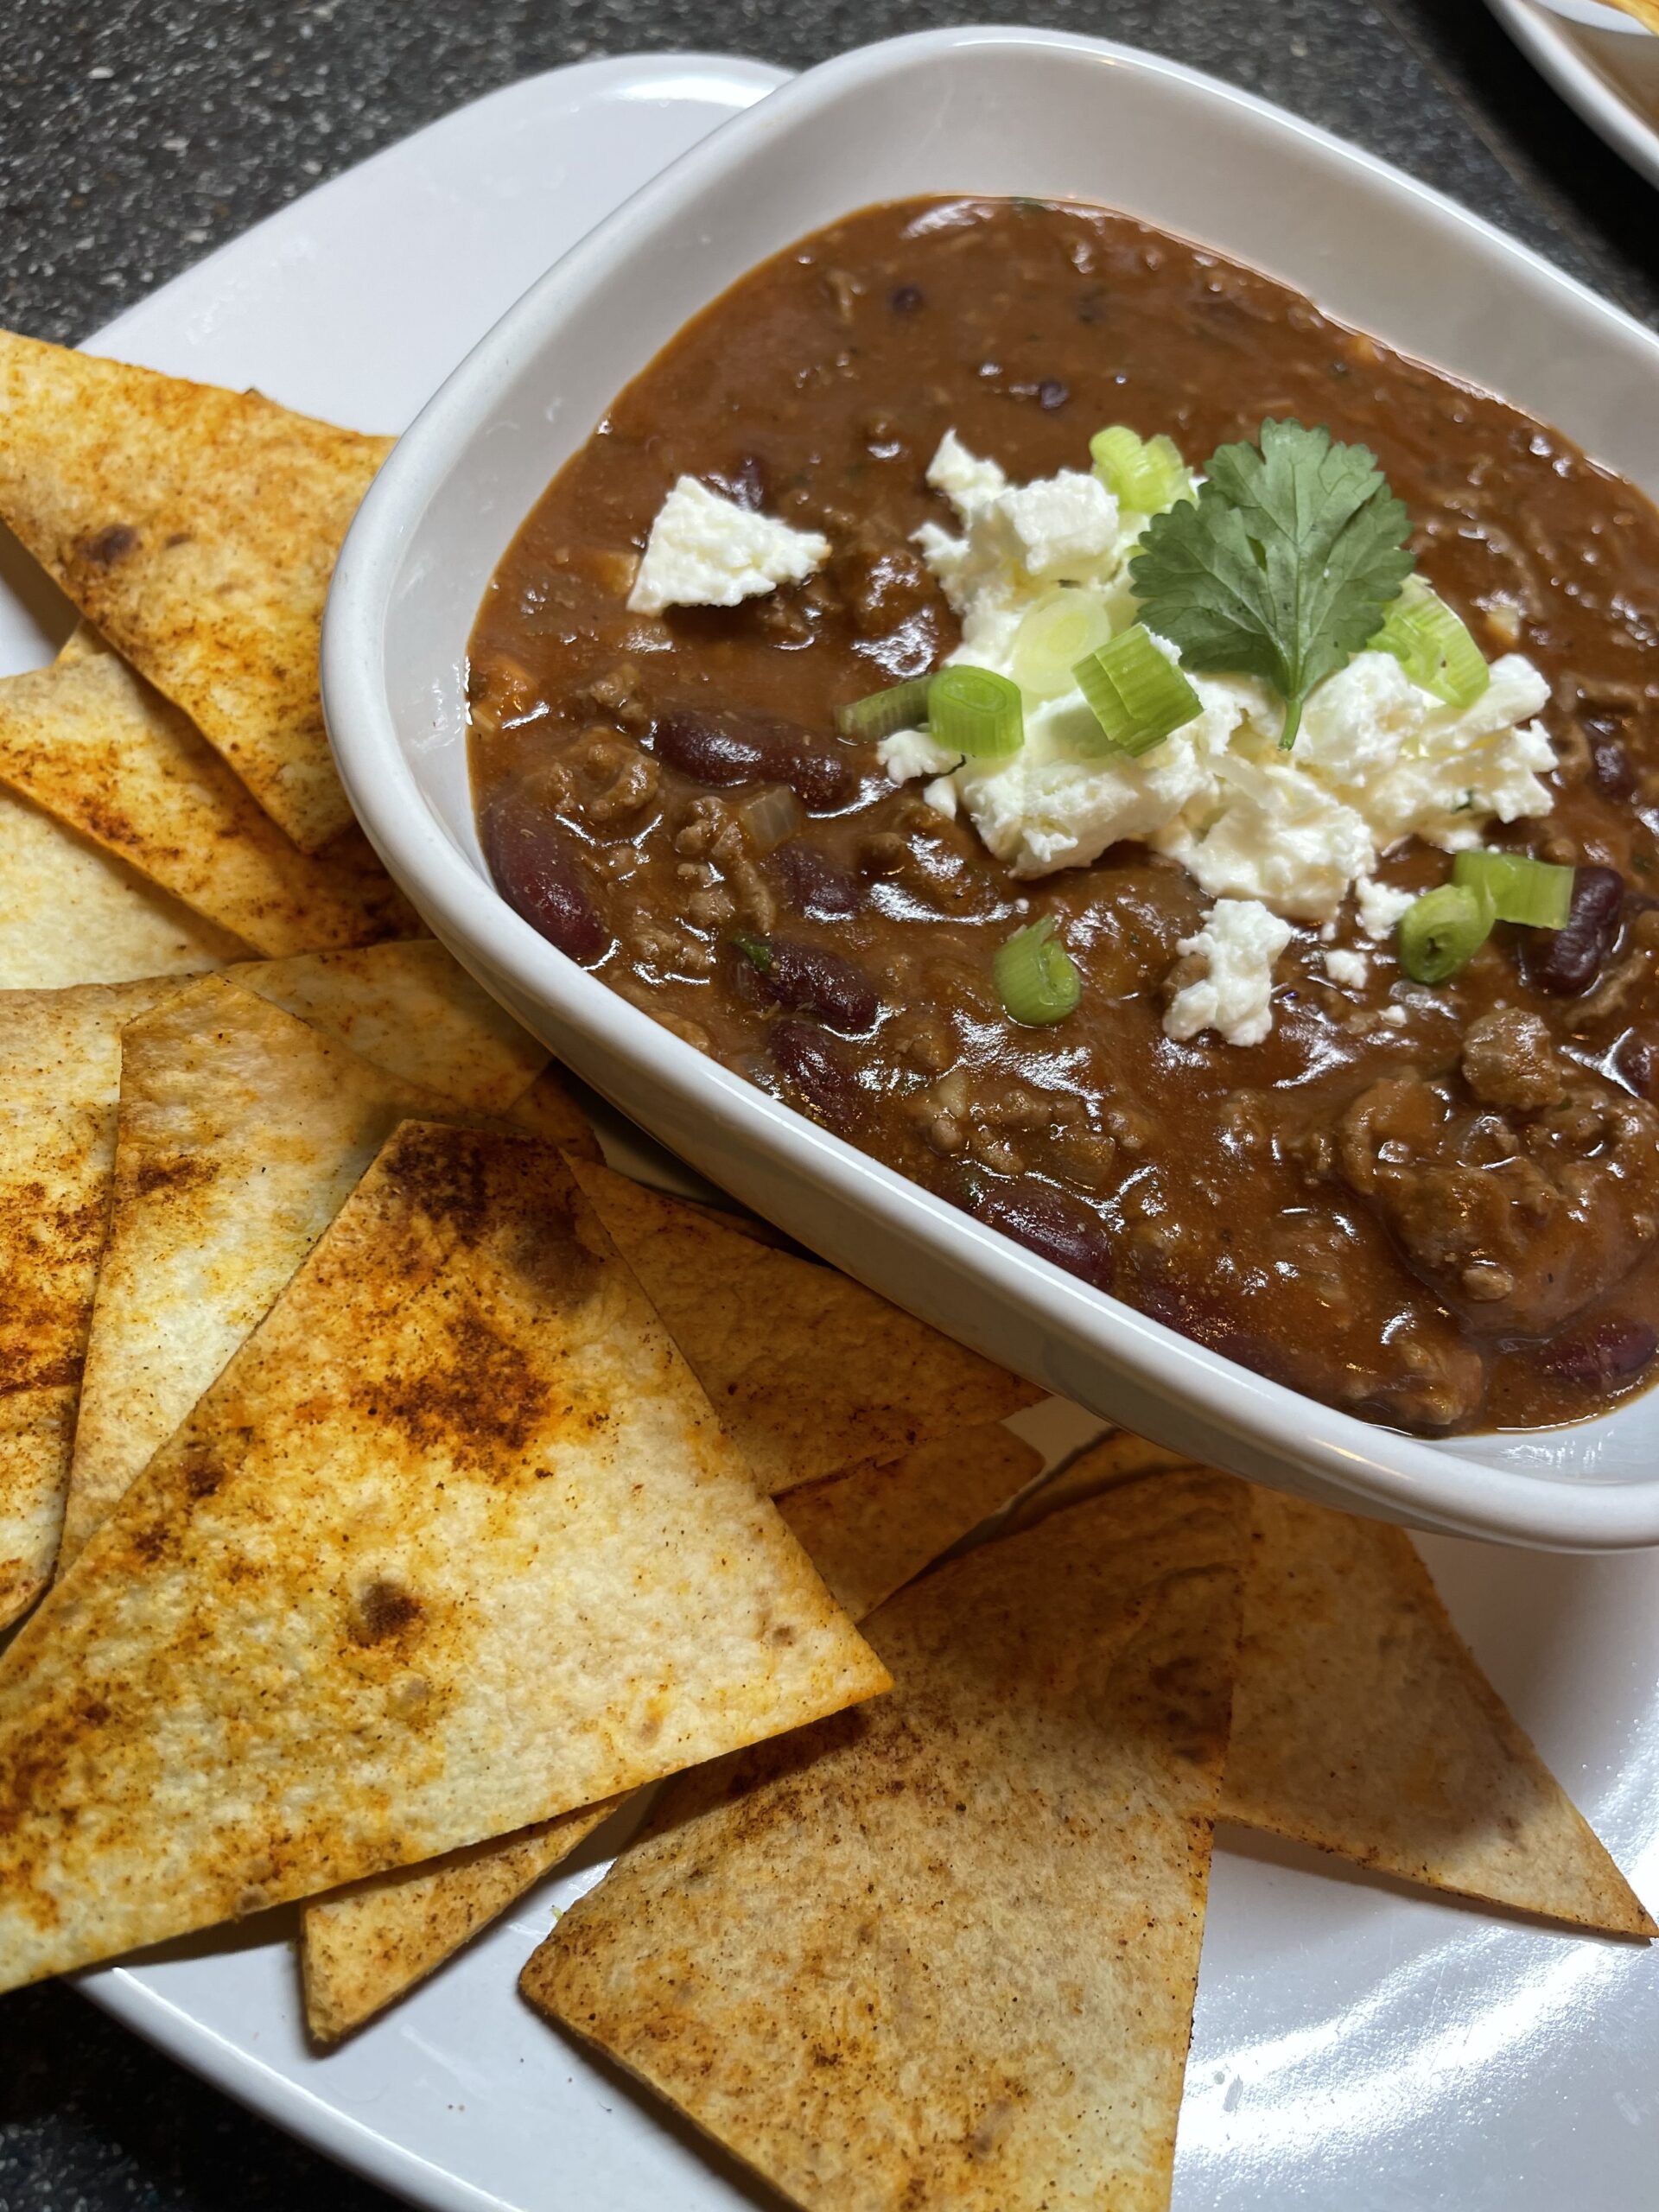 The Midas Chilli Con Carne With Tortilla Chips